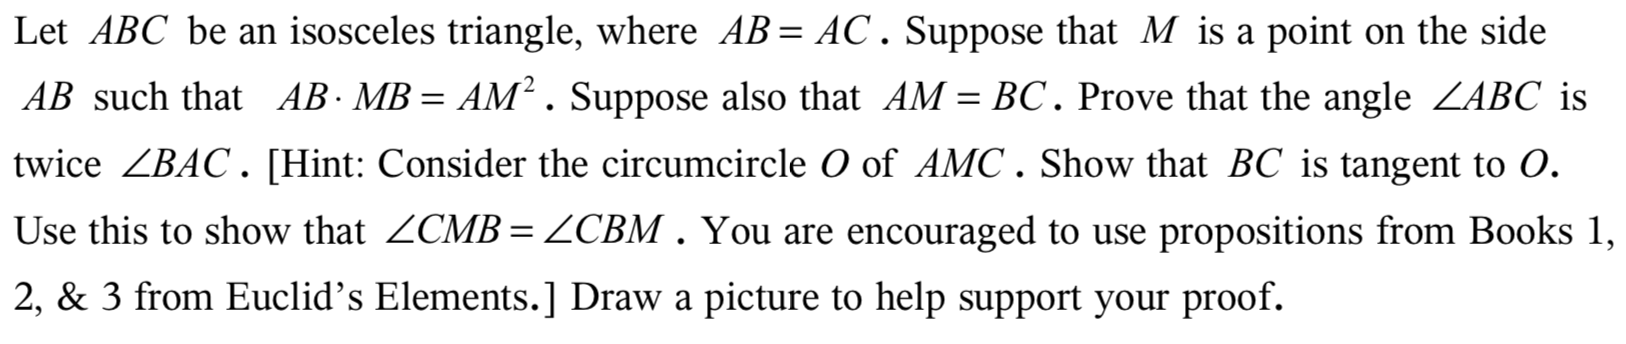 Let ABC be an isosceles triangle, where AB AC. Suppose that M is a point
on the side
AB such that AB- MB = AM2. Suppose also that AM = BC. Prove that the angle ZABC is
twice ZBAC. [Hint: Consider the circumcircle O of AMC. Show that BC is tangent to O.
Use this to show that ZCMB = ZCBM . You are encouraged to use
propositions from Books 1,
2, & 3 from Euclid's Elements.] Draw a picture to help support your proof.
